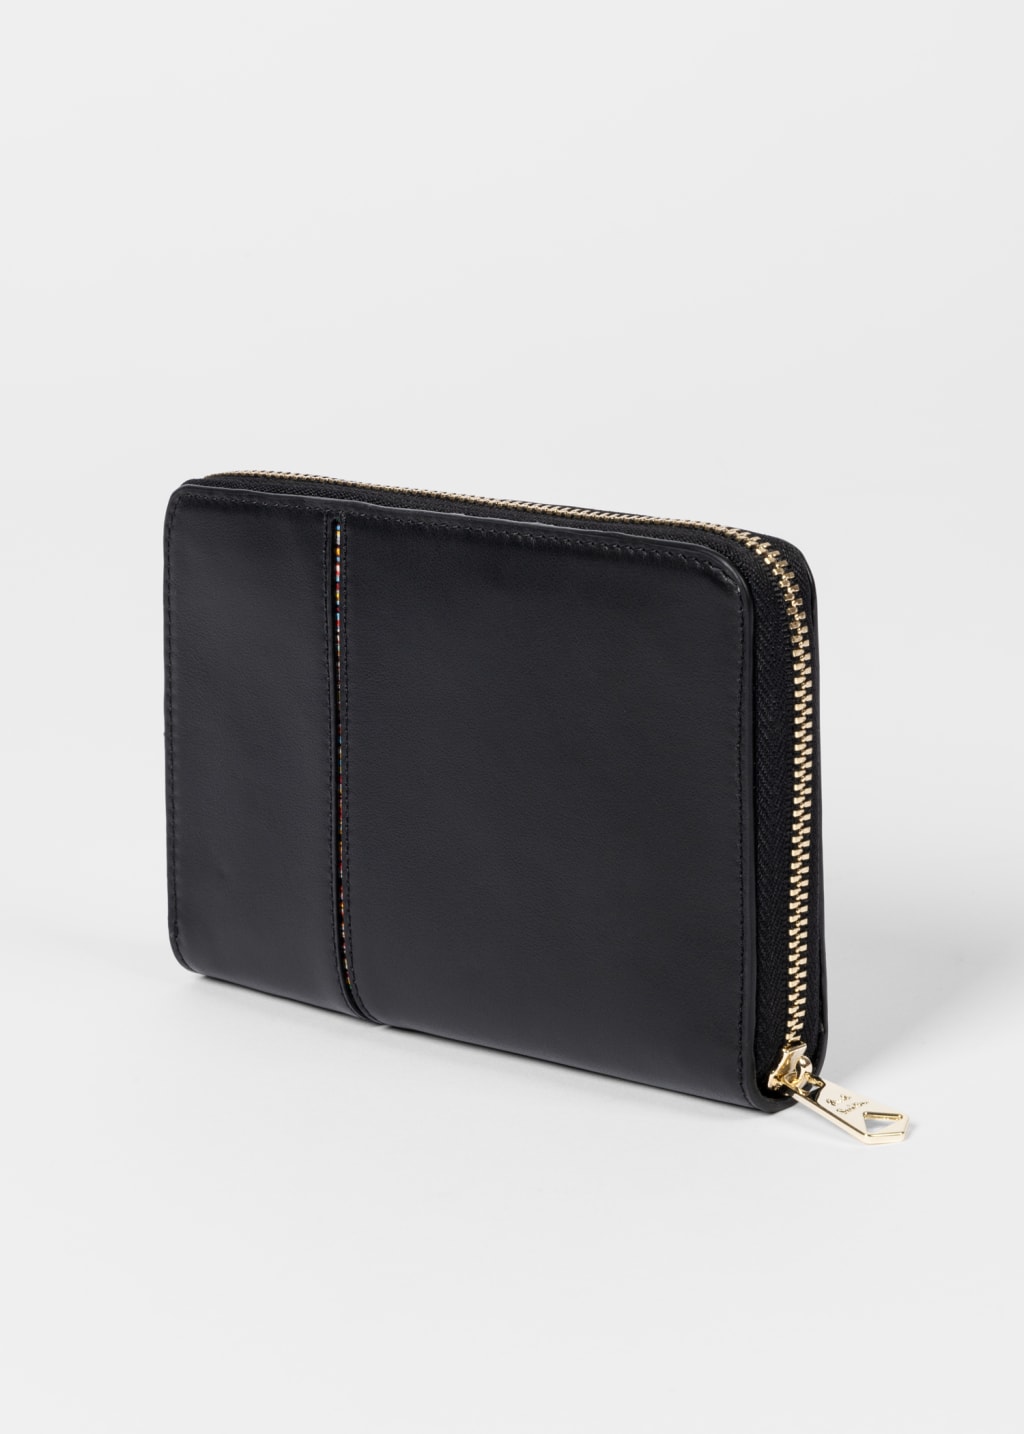 Product View - Women's Black Leather Signature Stripe Interior Zip Around Purse by Paul Smith